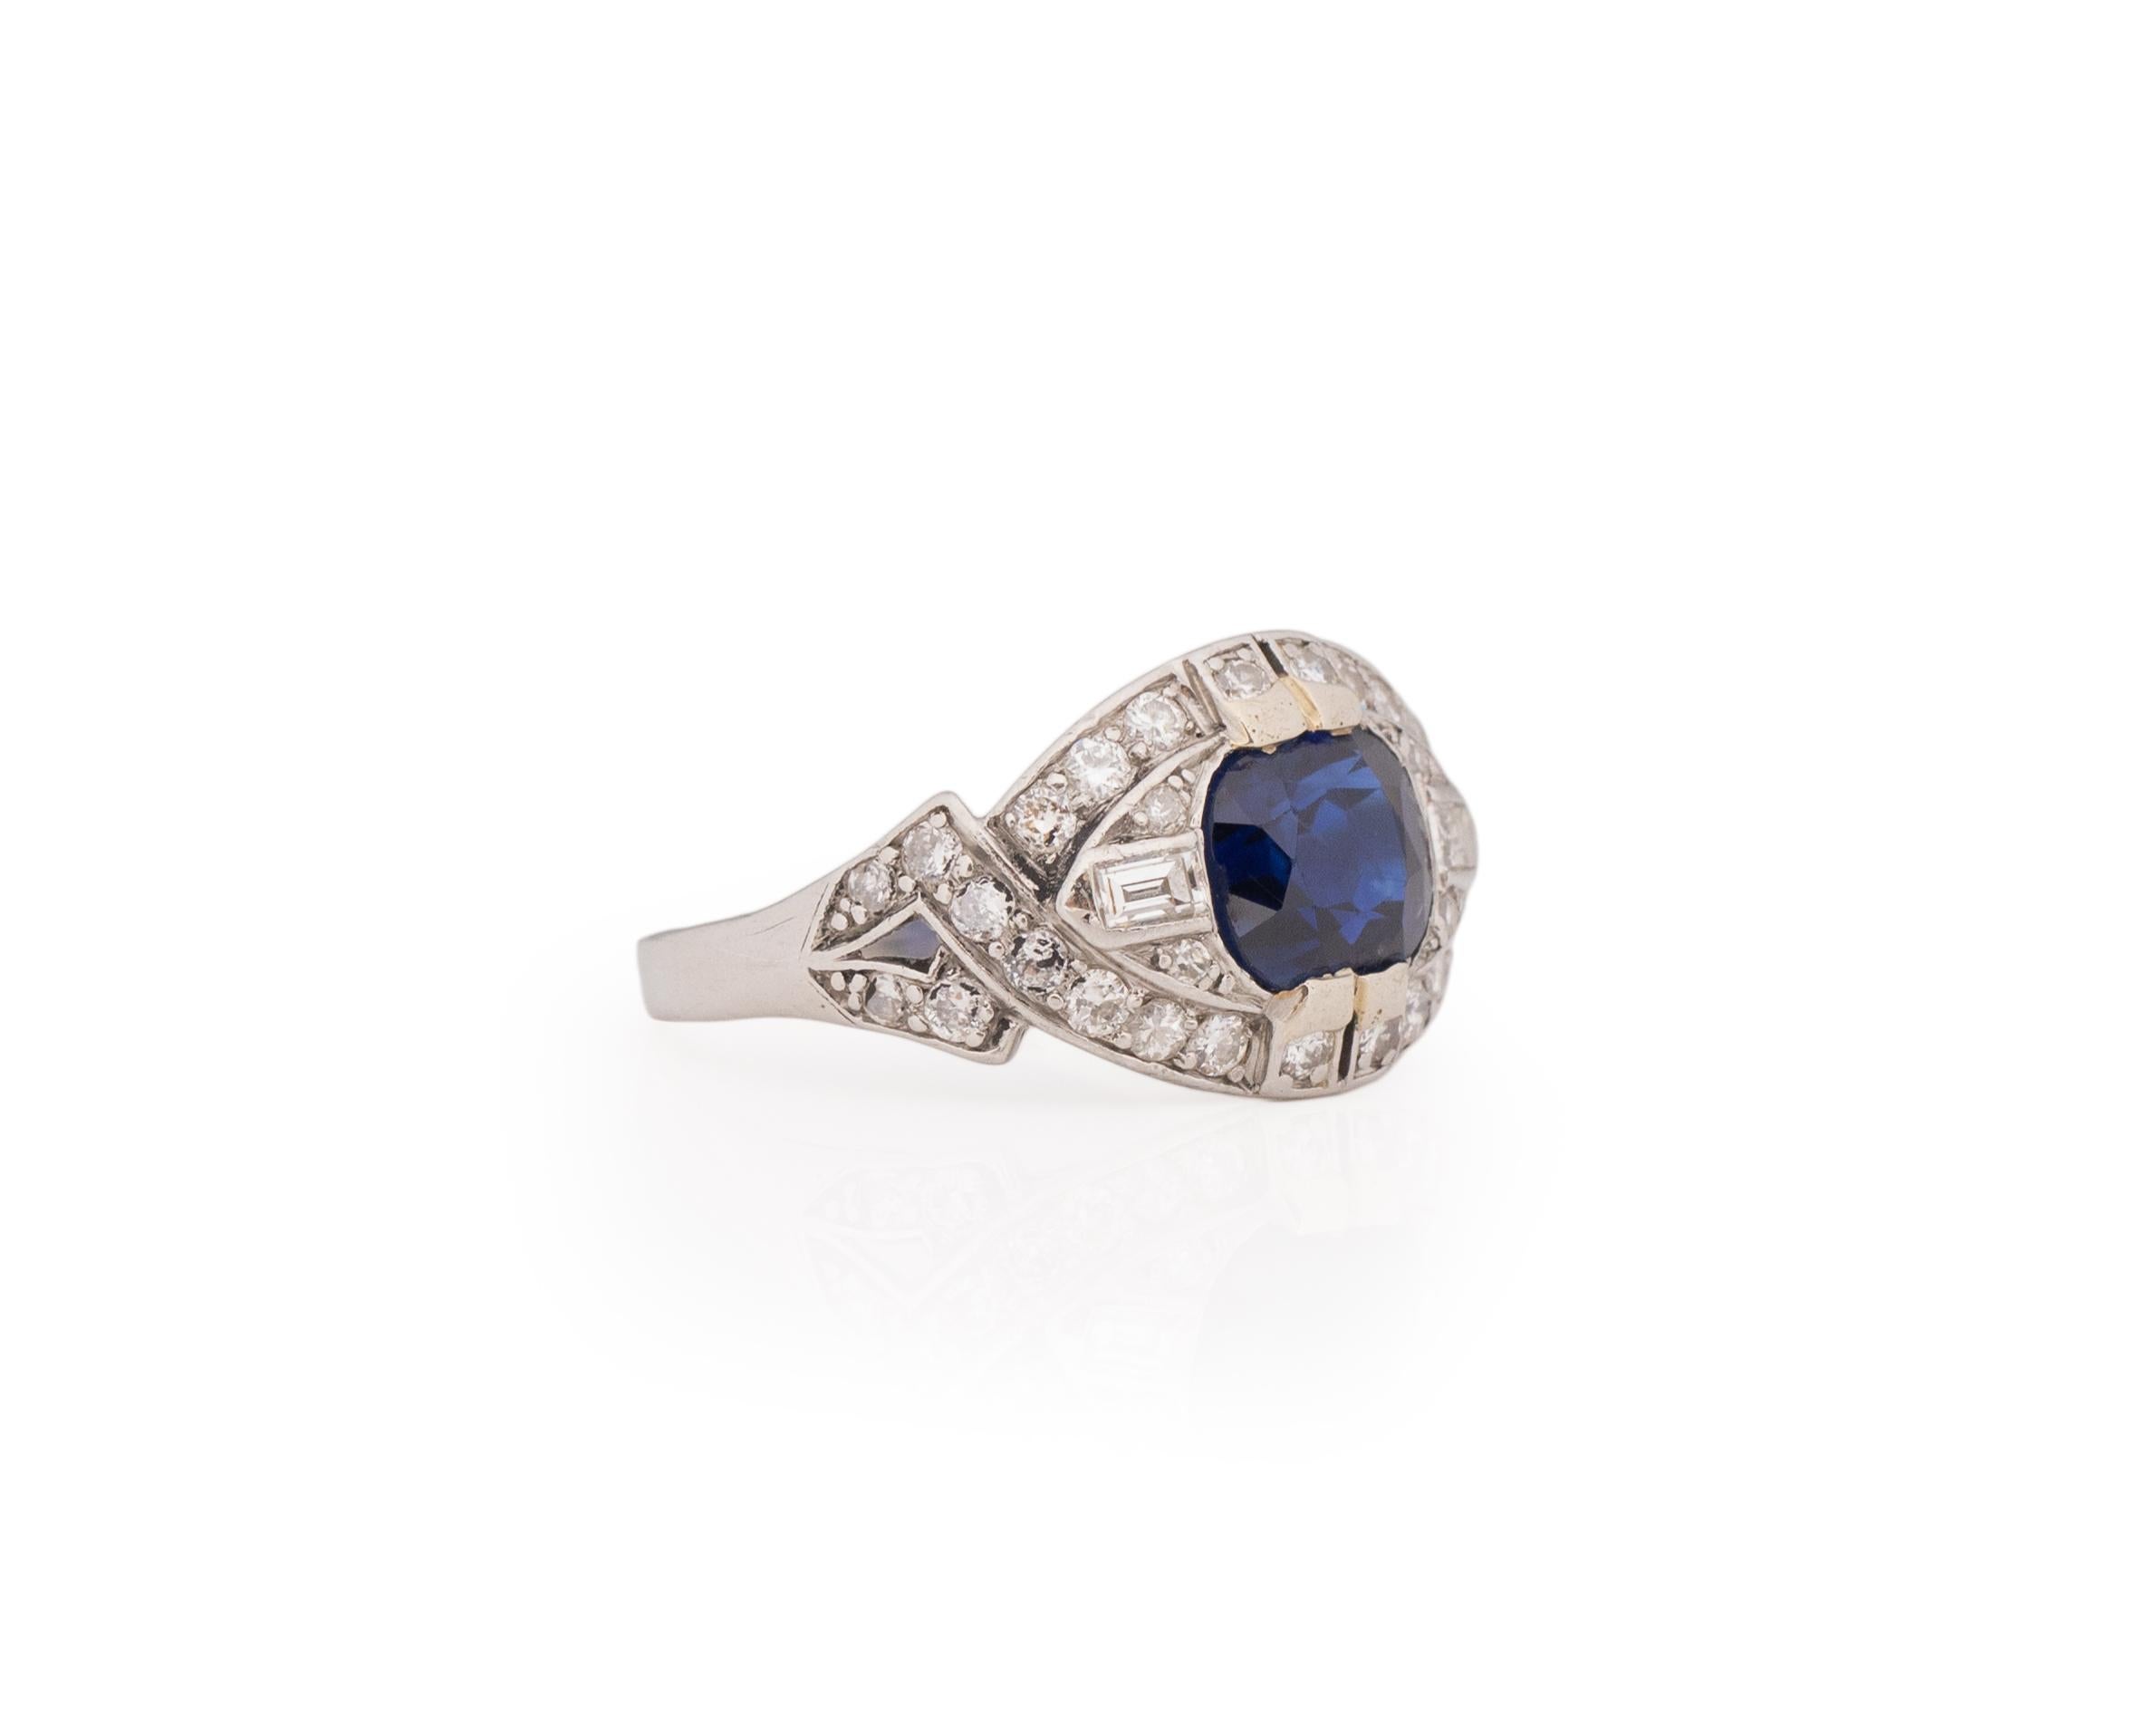 Ring Size: 7
Metal Type: Platinum [Hallmarked, and Tested]
Weight: 5.3 grams

Diamond Details:
GIA REPORT: 2221468213
Weight: 2.25ct
Cut: Antique Cushion
Color: Blue
Measurements: 7.73mm x 6.70mm x 4.55mm

Finger to Top of Stone Measurement: